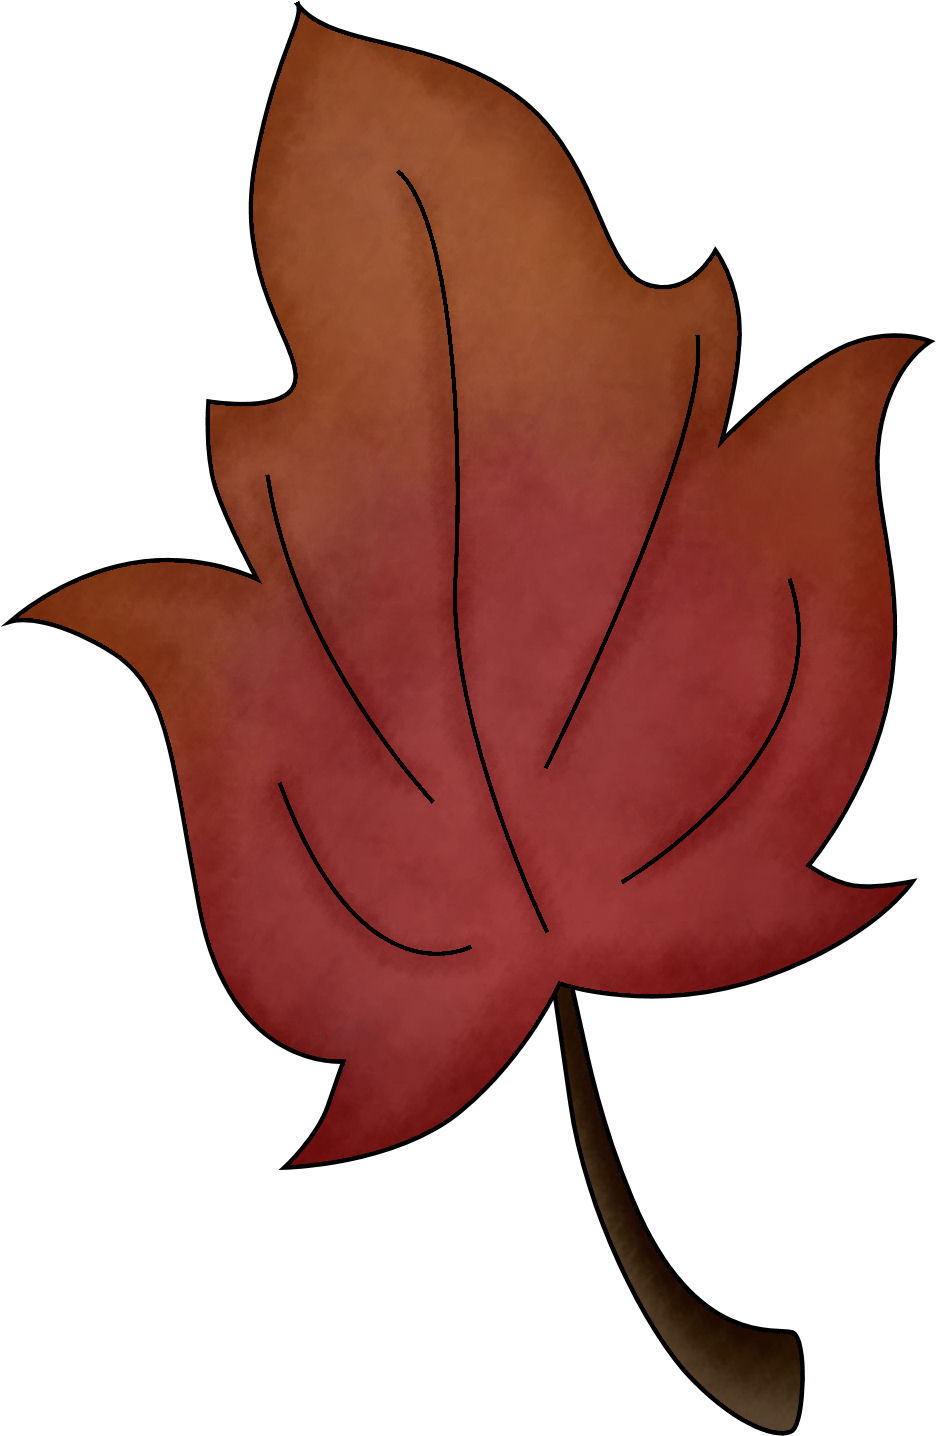 Fall leaves fall leaf clipart no background free clipart images